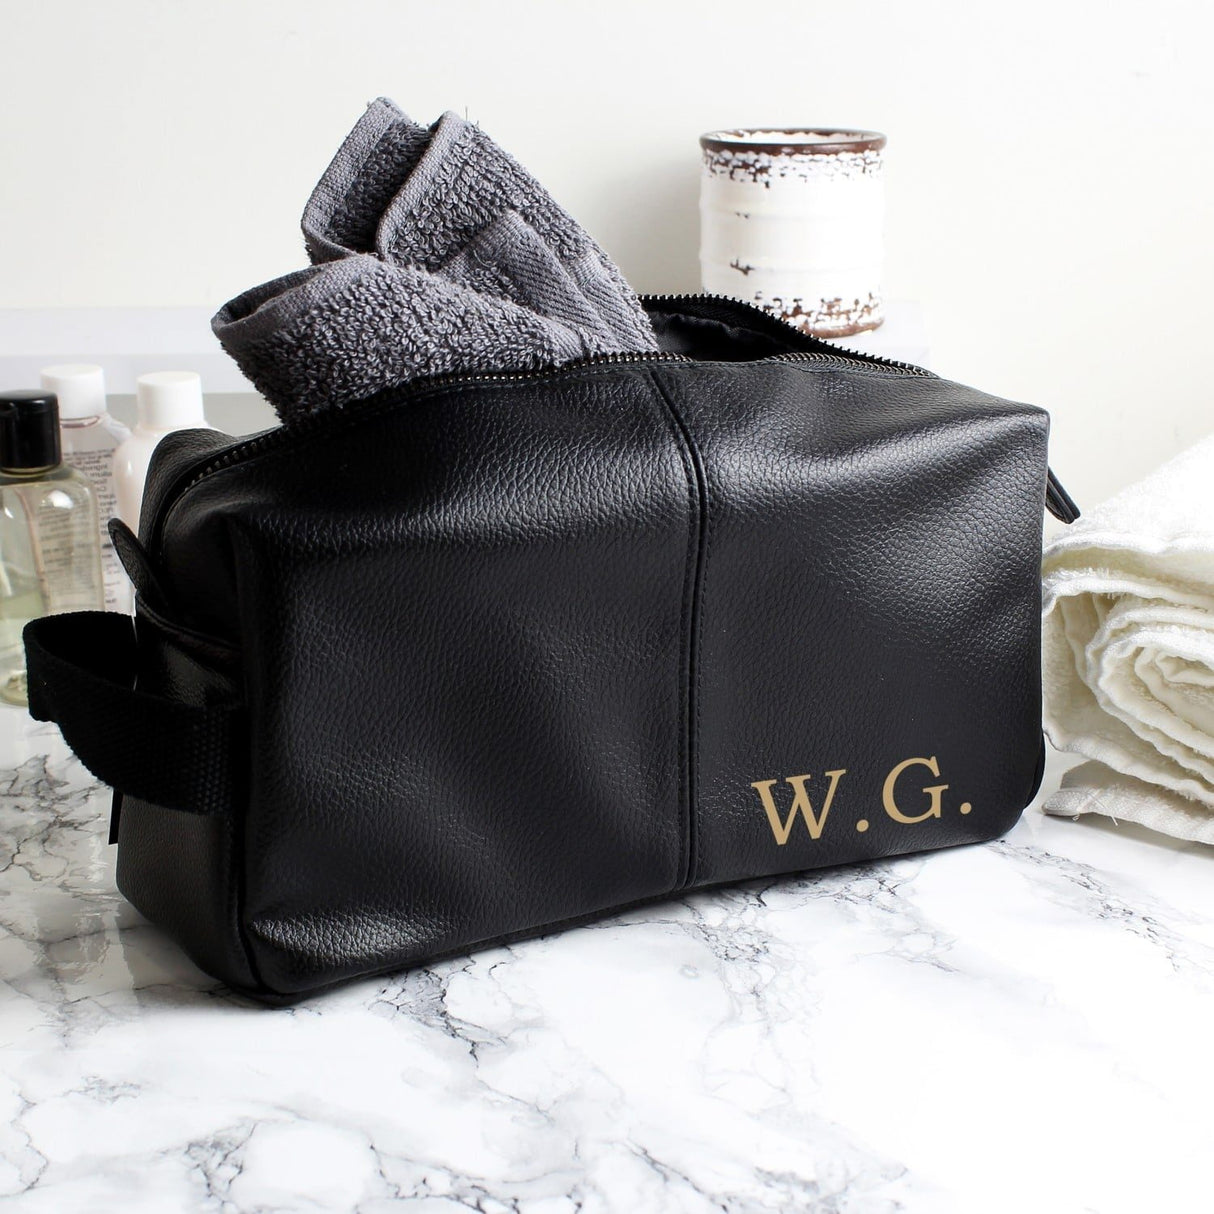 Luxury Initials Black Leatherette Wash Bag - Gift Moments